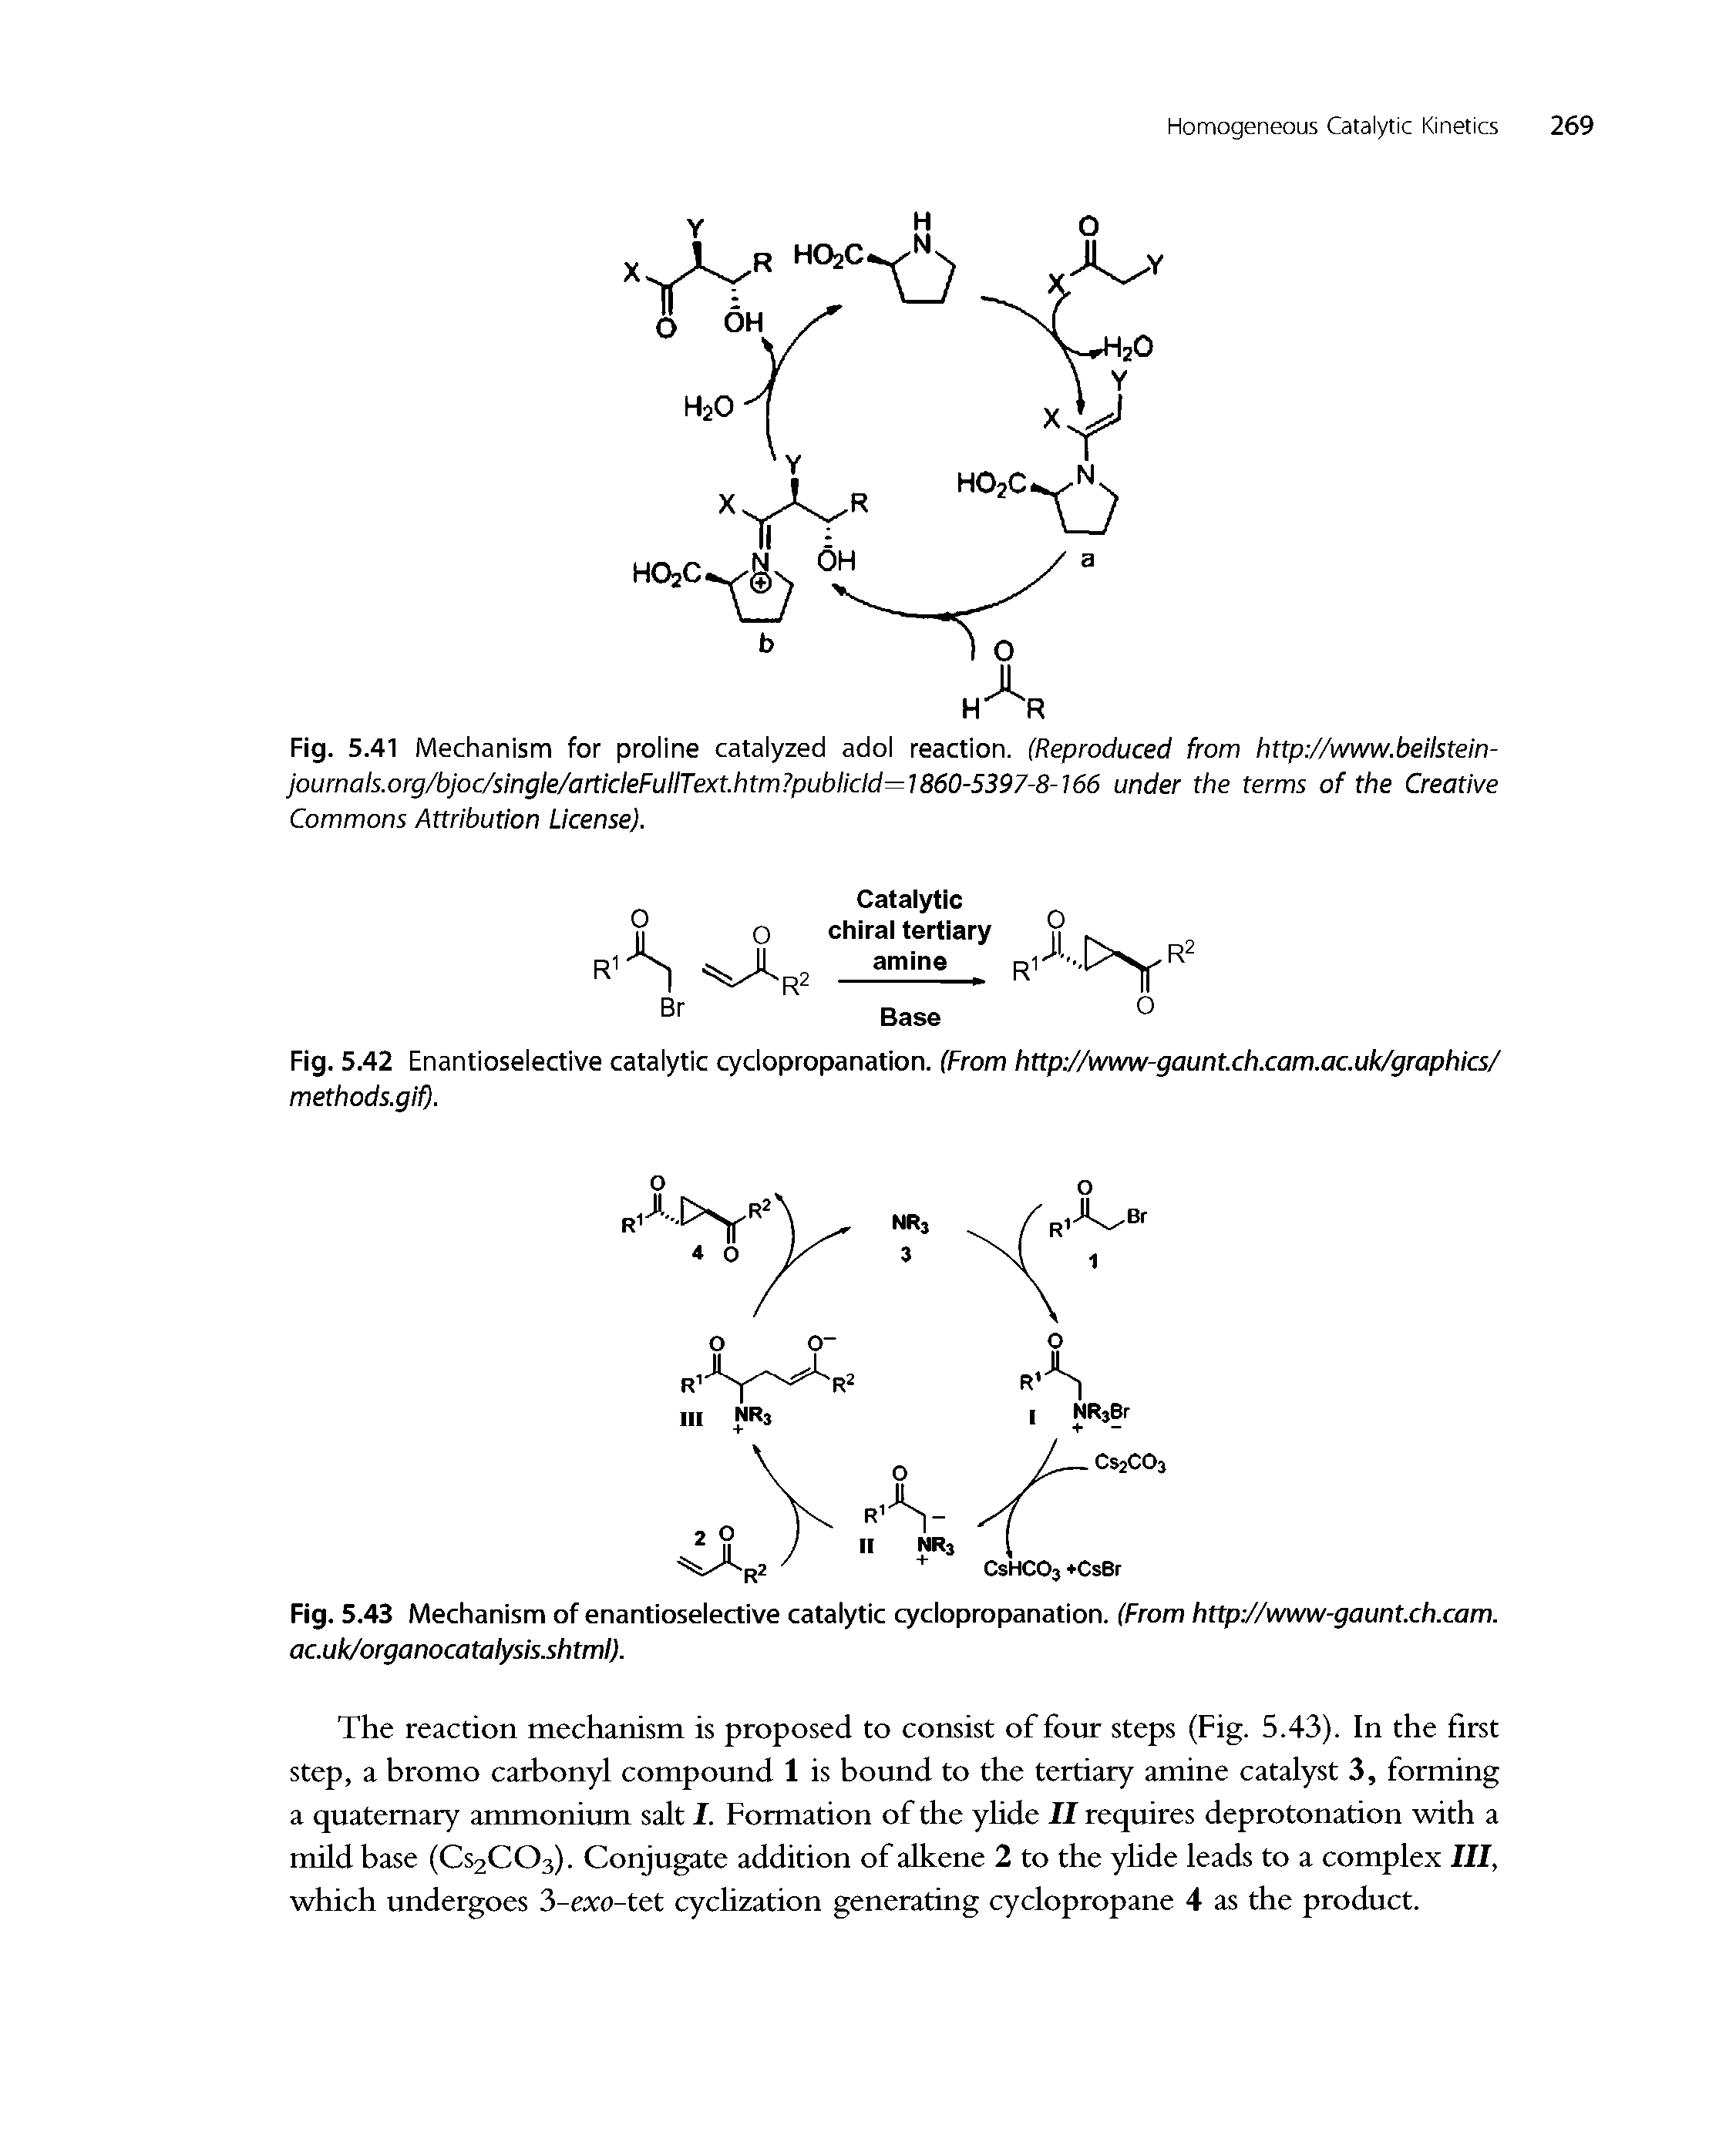 Fig. 5.43 Mechanism of enantioselective catalytic cyclopropanation. (From httpj/www-gaunt.ch.cam. ac.uk/organocatalysis.sbtml).